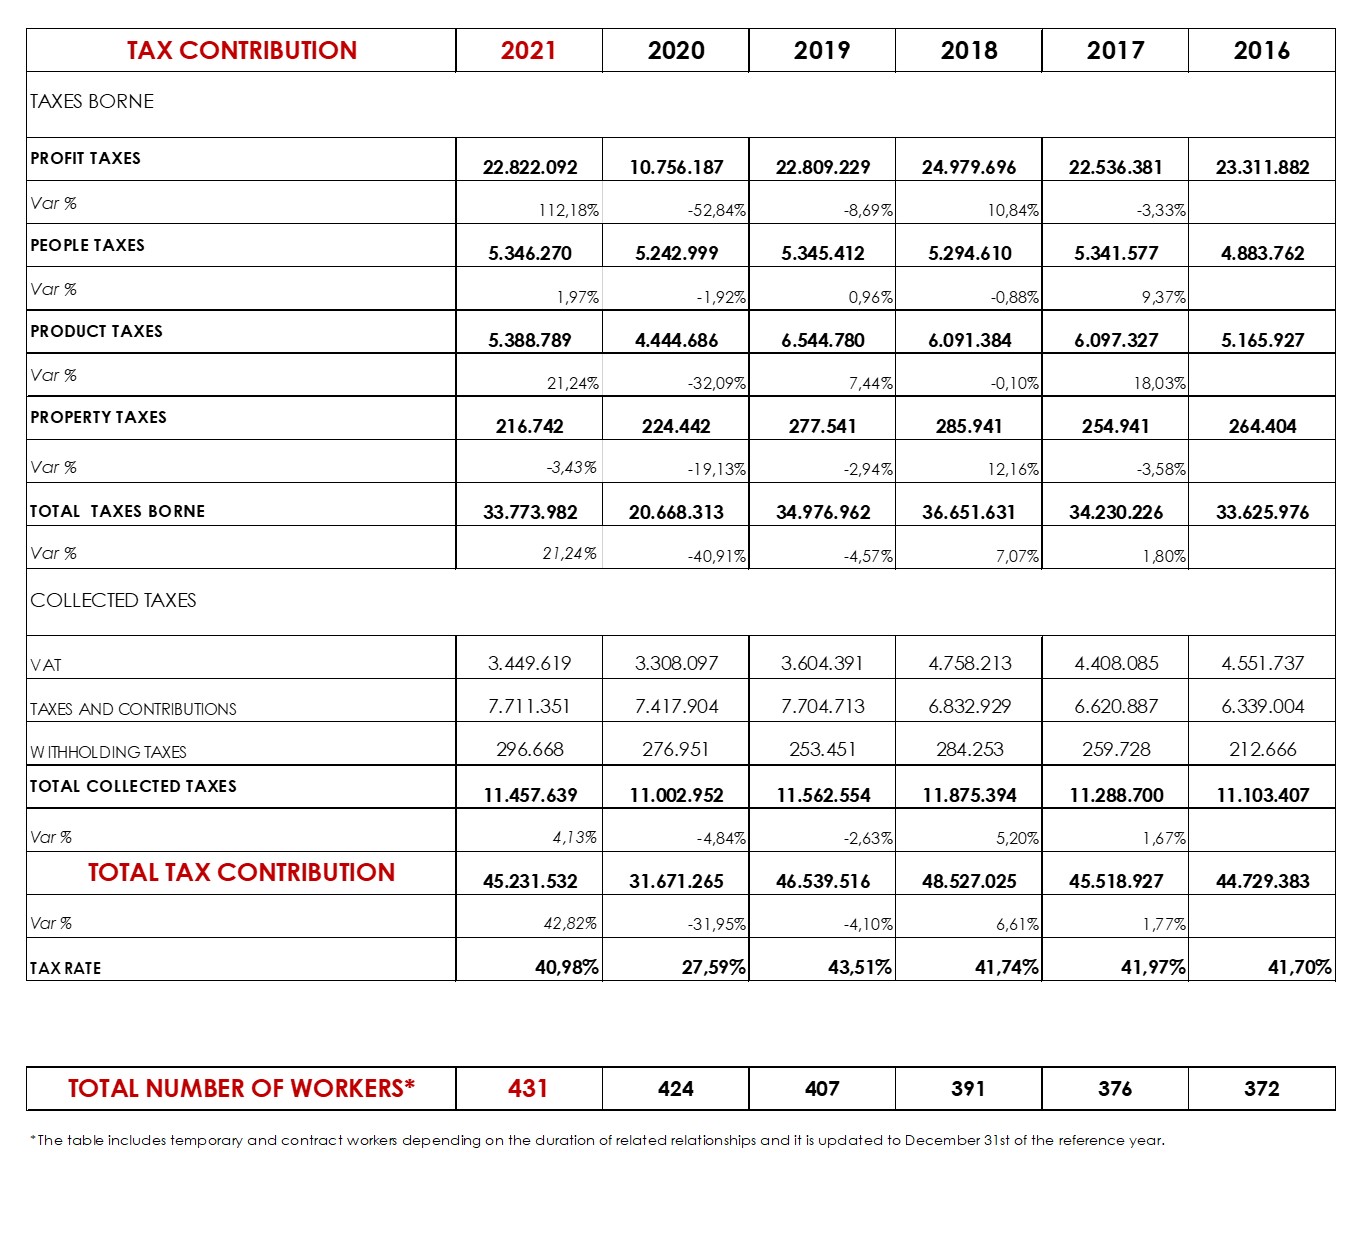 TOTAL TAX CONTRIBUTION SITO ABIOGEN eng